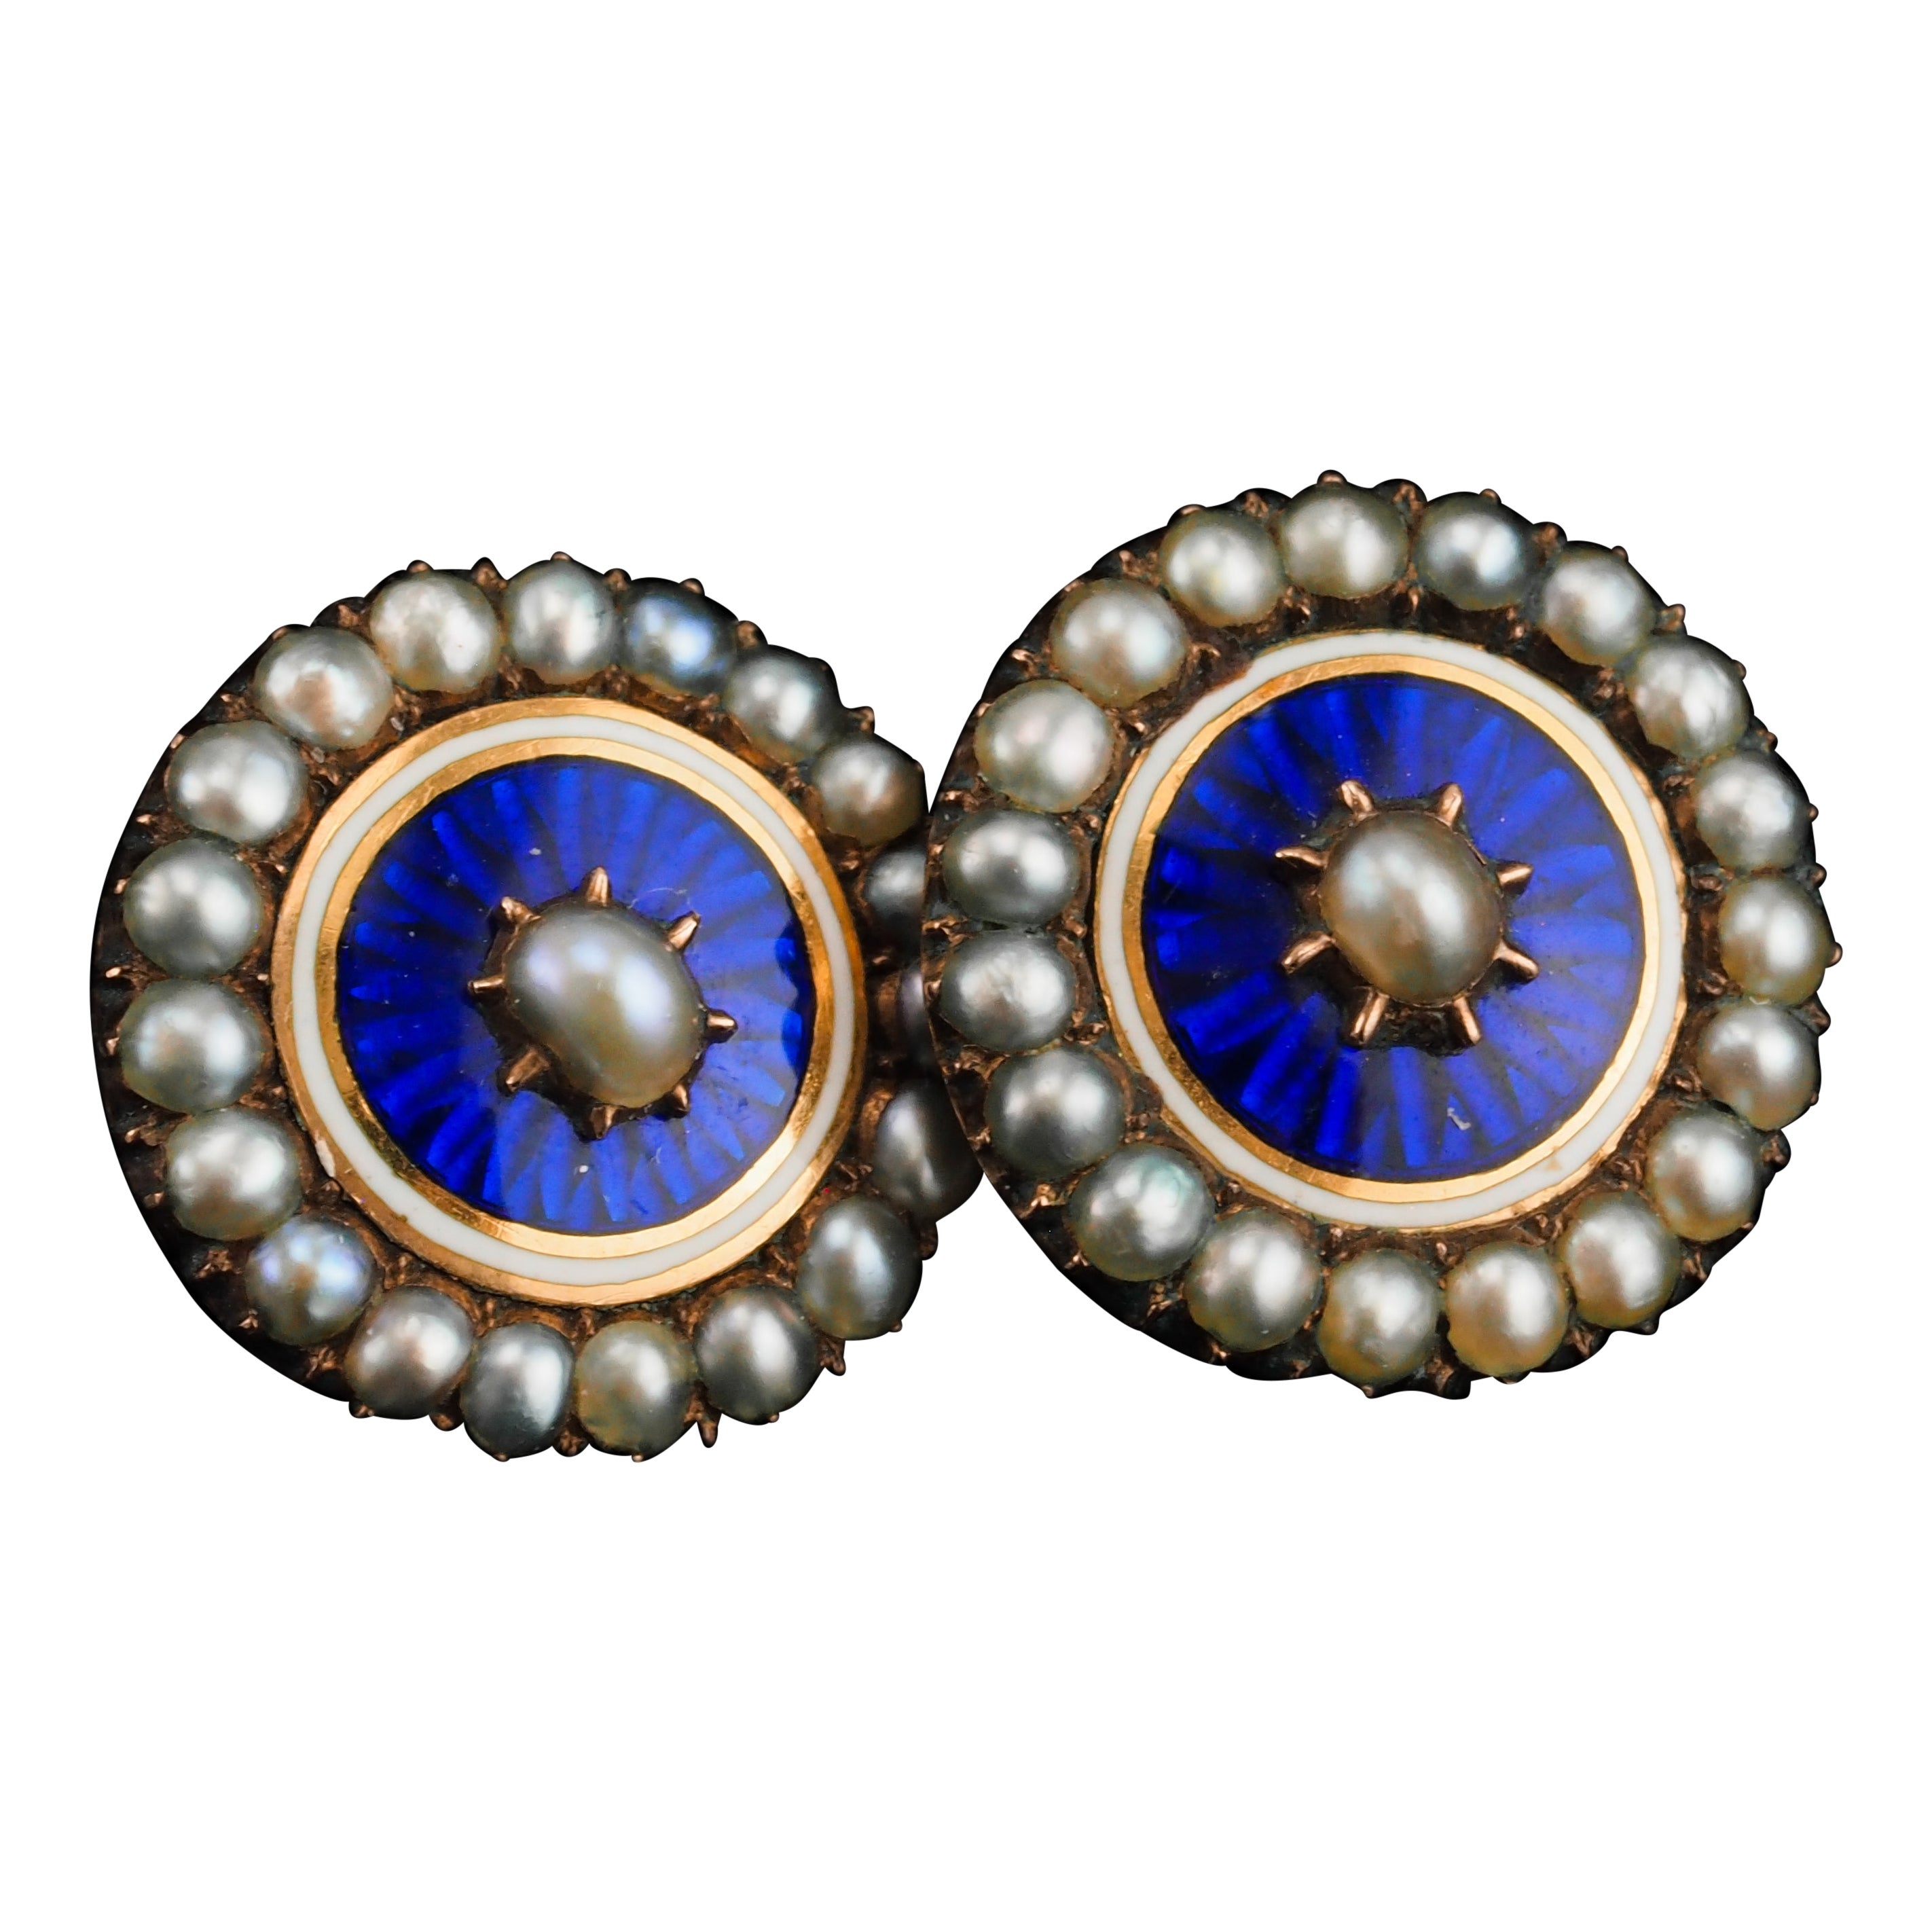 Antique Georgian Gold Earrings with Blue Enamel Guilloche Pearl Cluster c.1800 For Sale